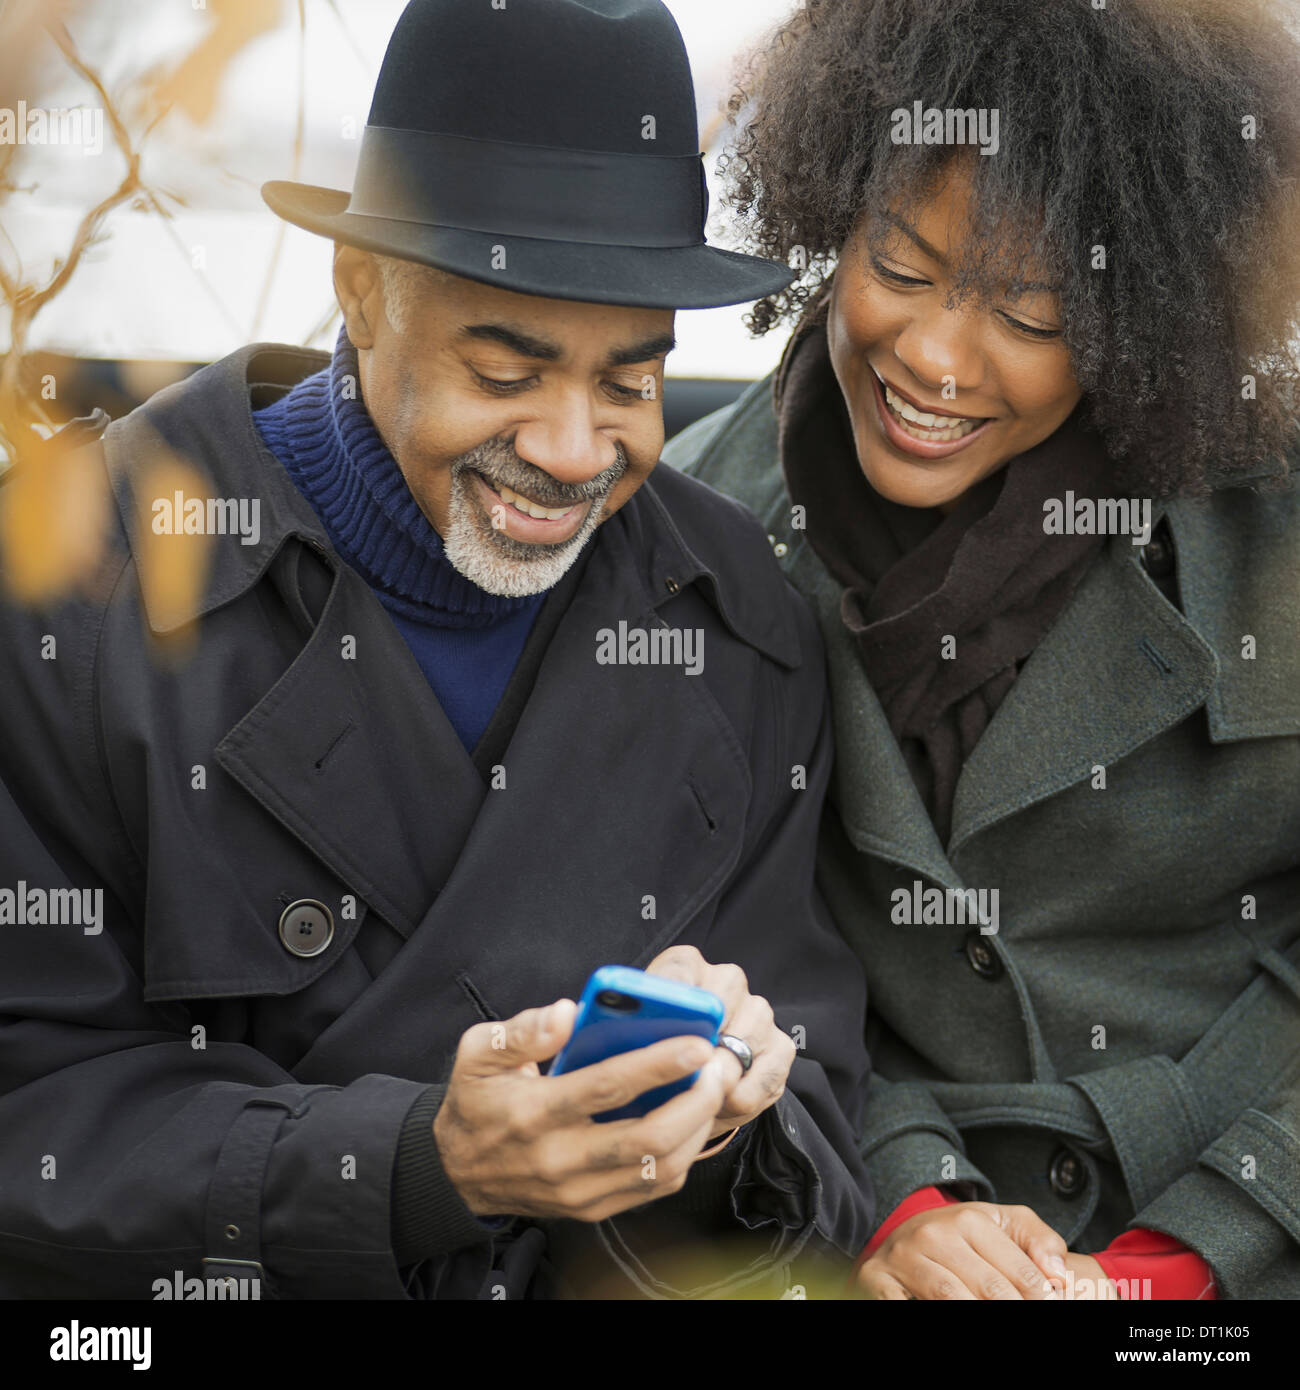 Two people a man and woman standing side by side keeping in contact using mobile phones Stock Photo